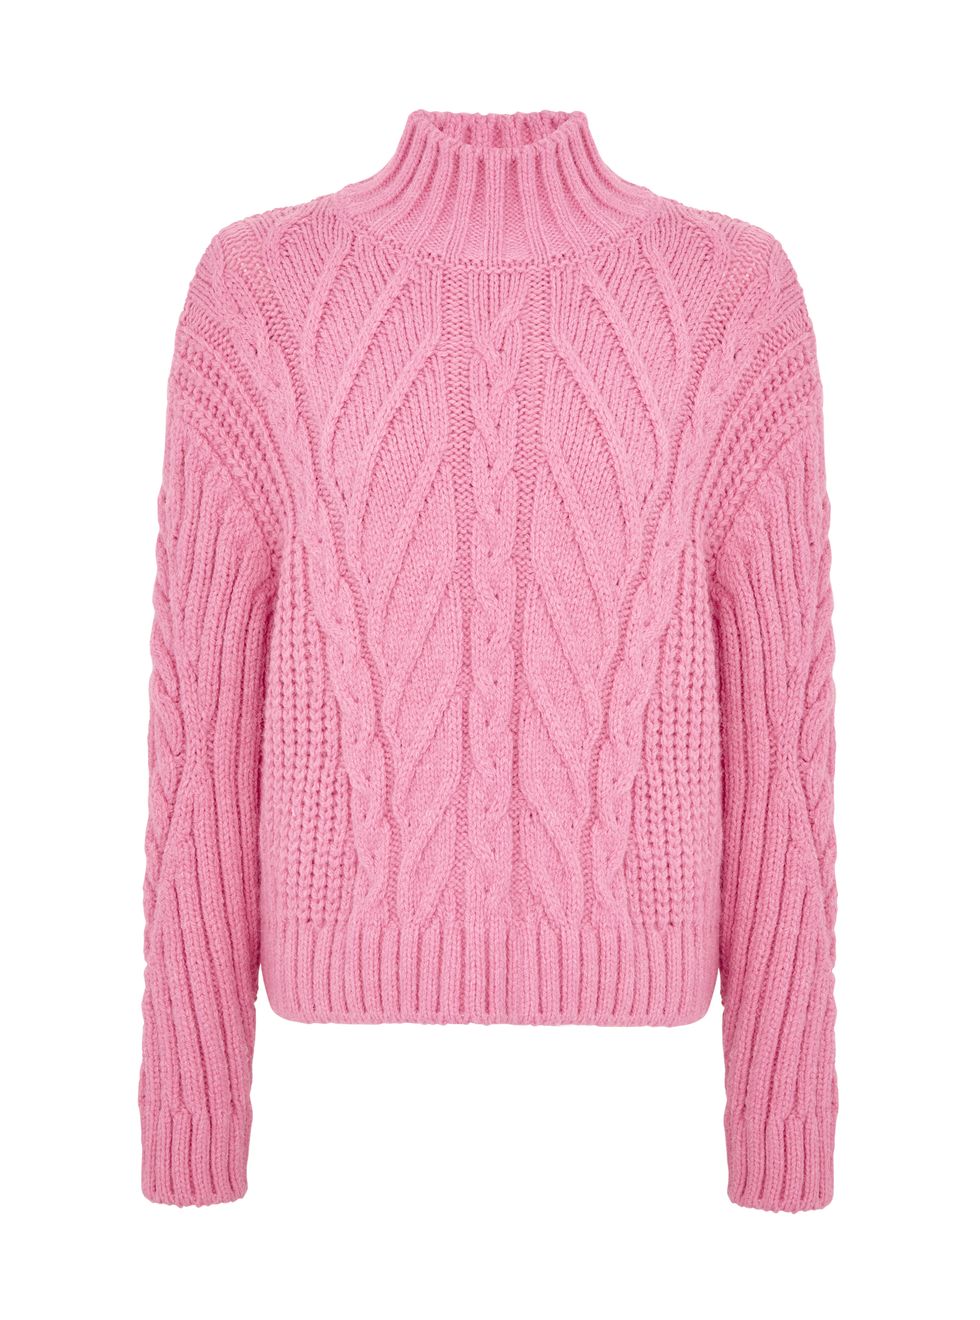 Sweater, Product, Sleeve, Textile, Outerwear, White, Wool, Magenta, Pink, Pattern, 